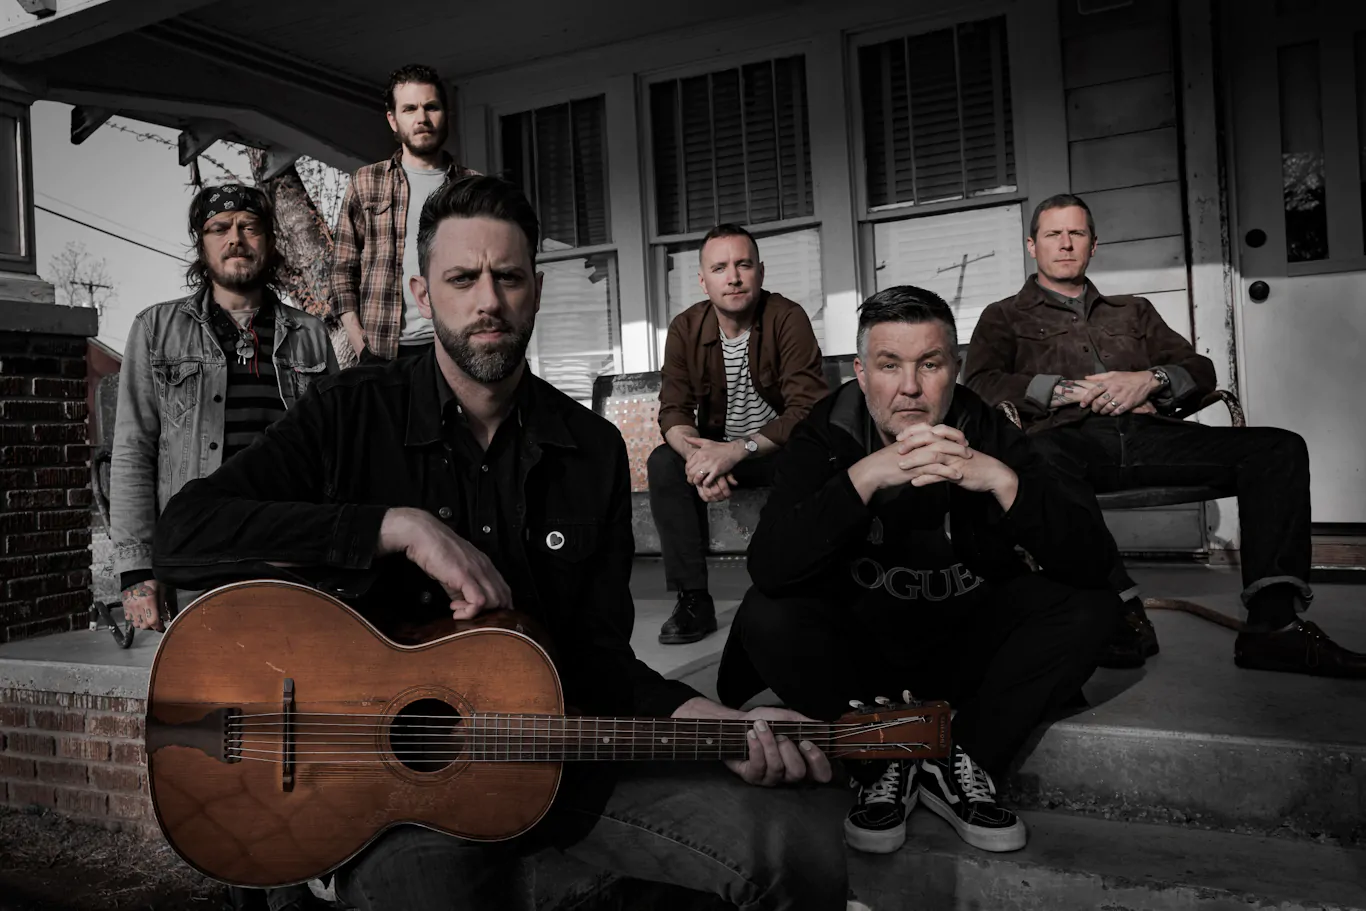 DROPKICK MURPHYS share ‘All You Fonies’ & announce UK tour support acts for 2023